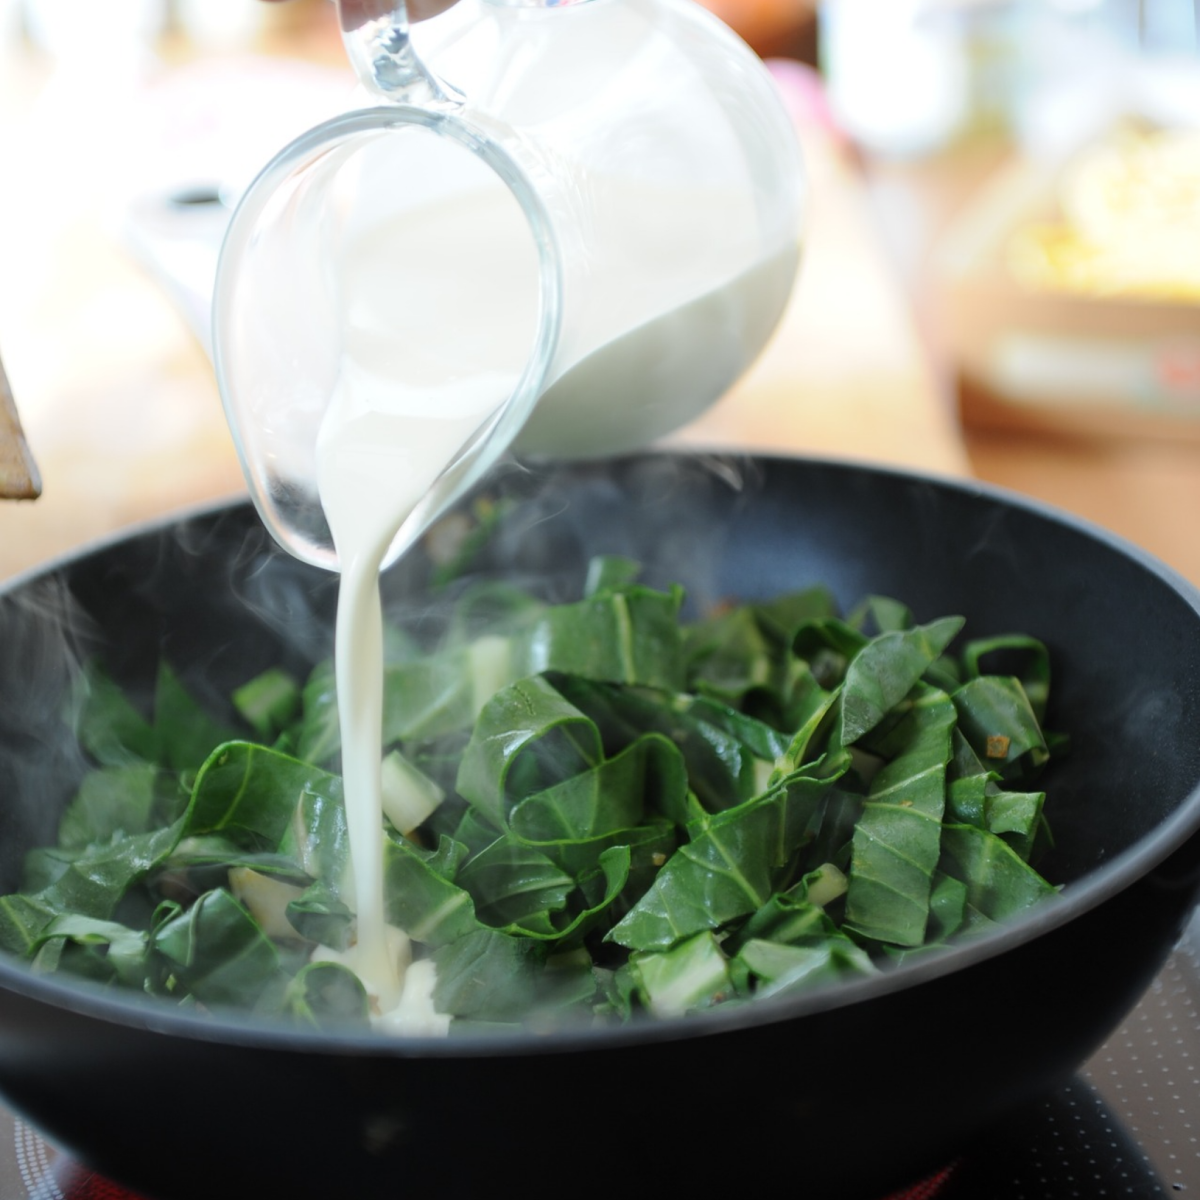 Creamed spinach has a nutrient load of iron, vitamins A,C and Calcium.